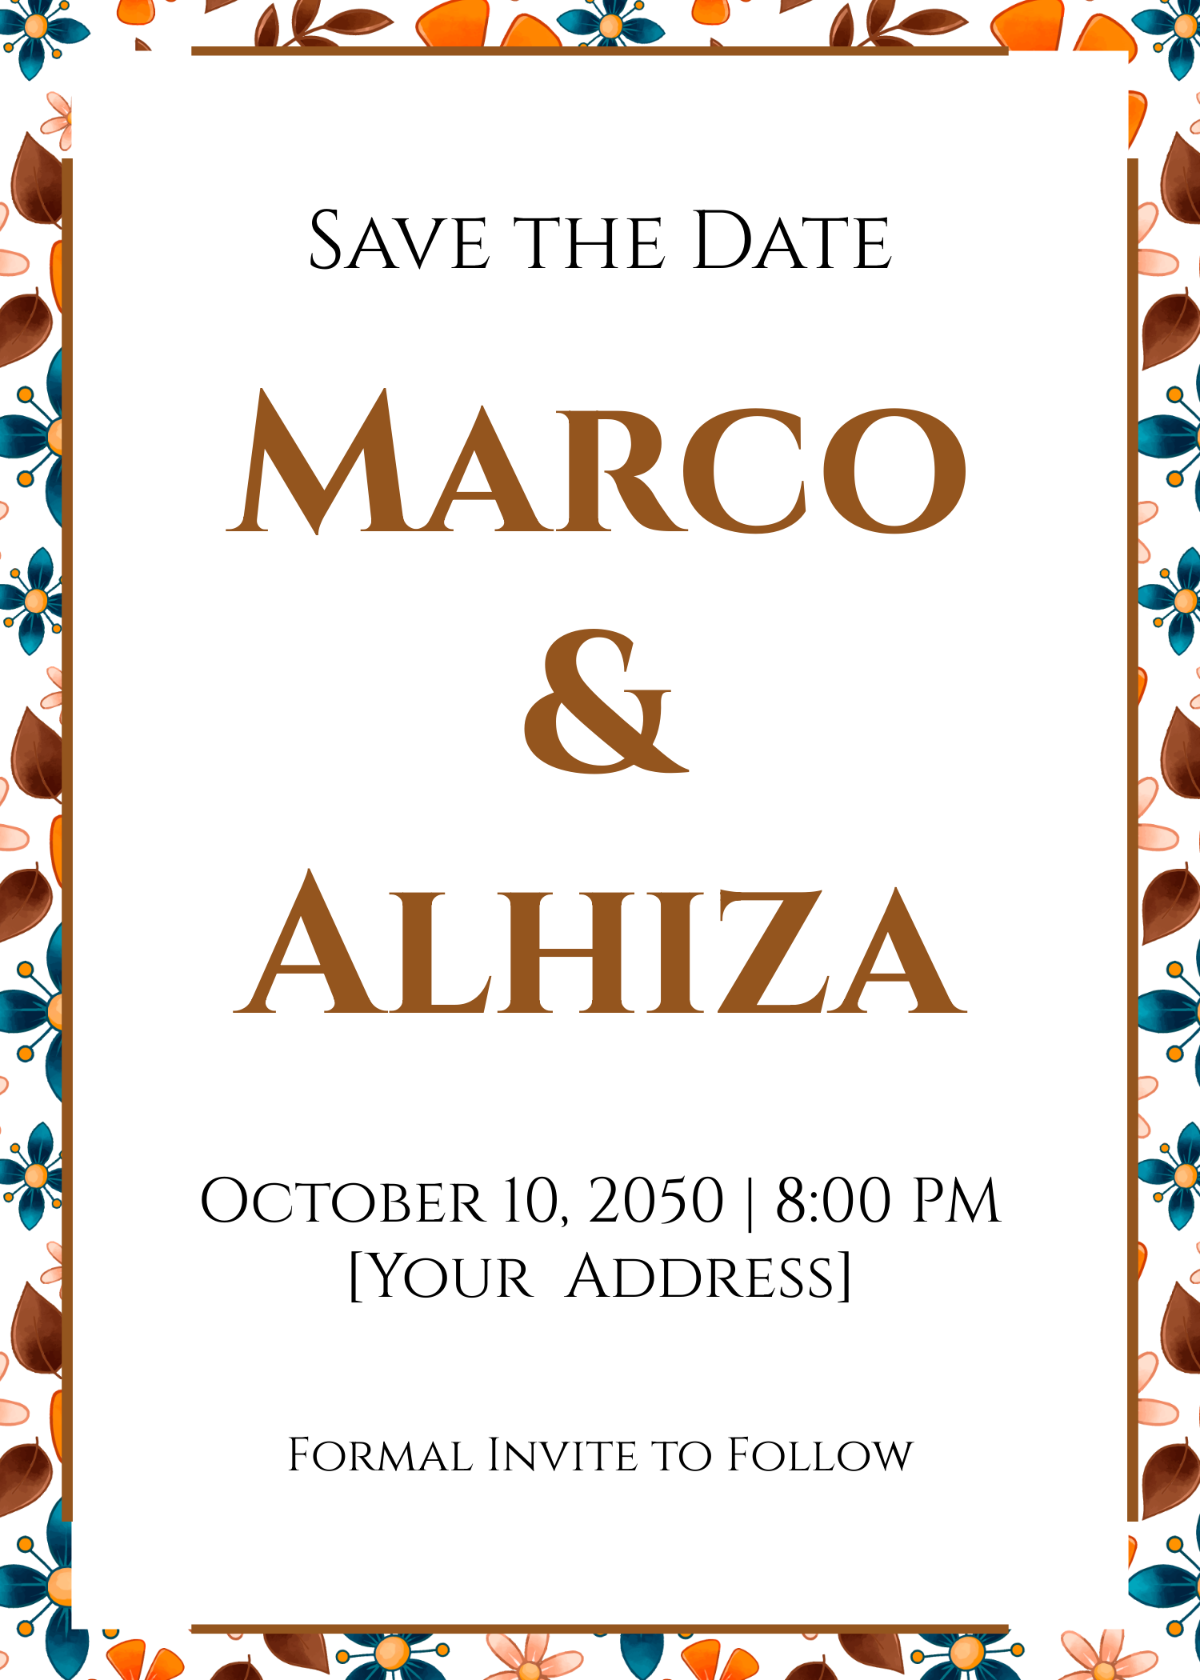 Mosaic Save the Date